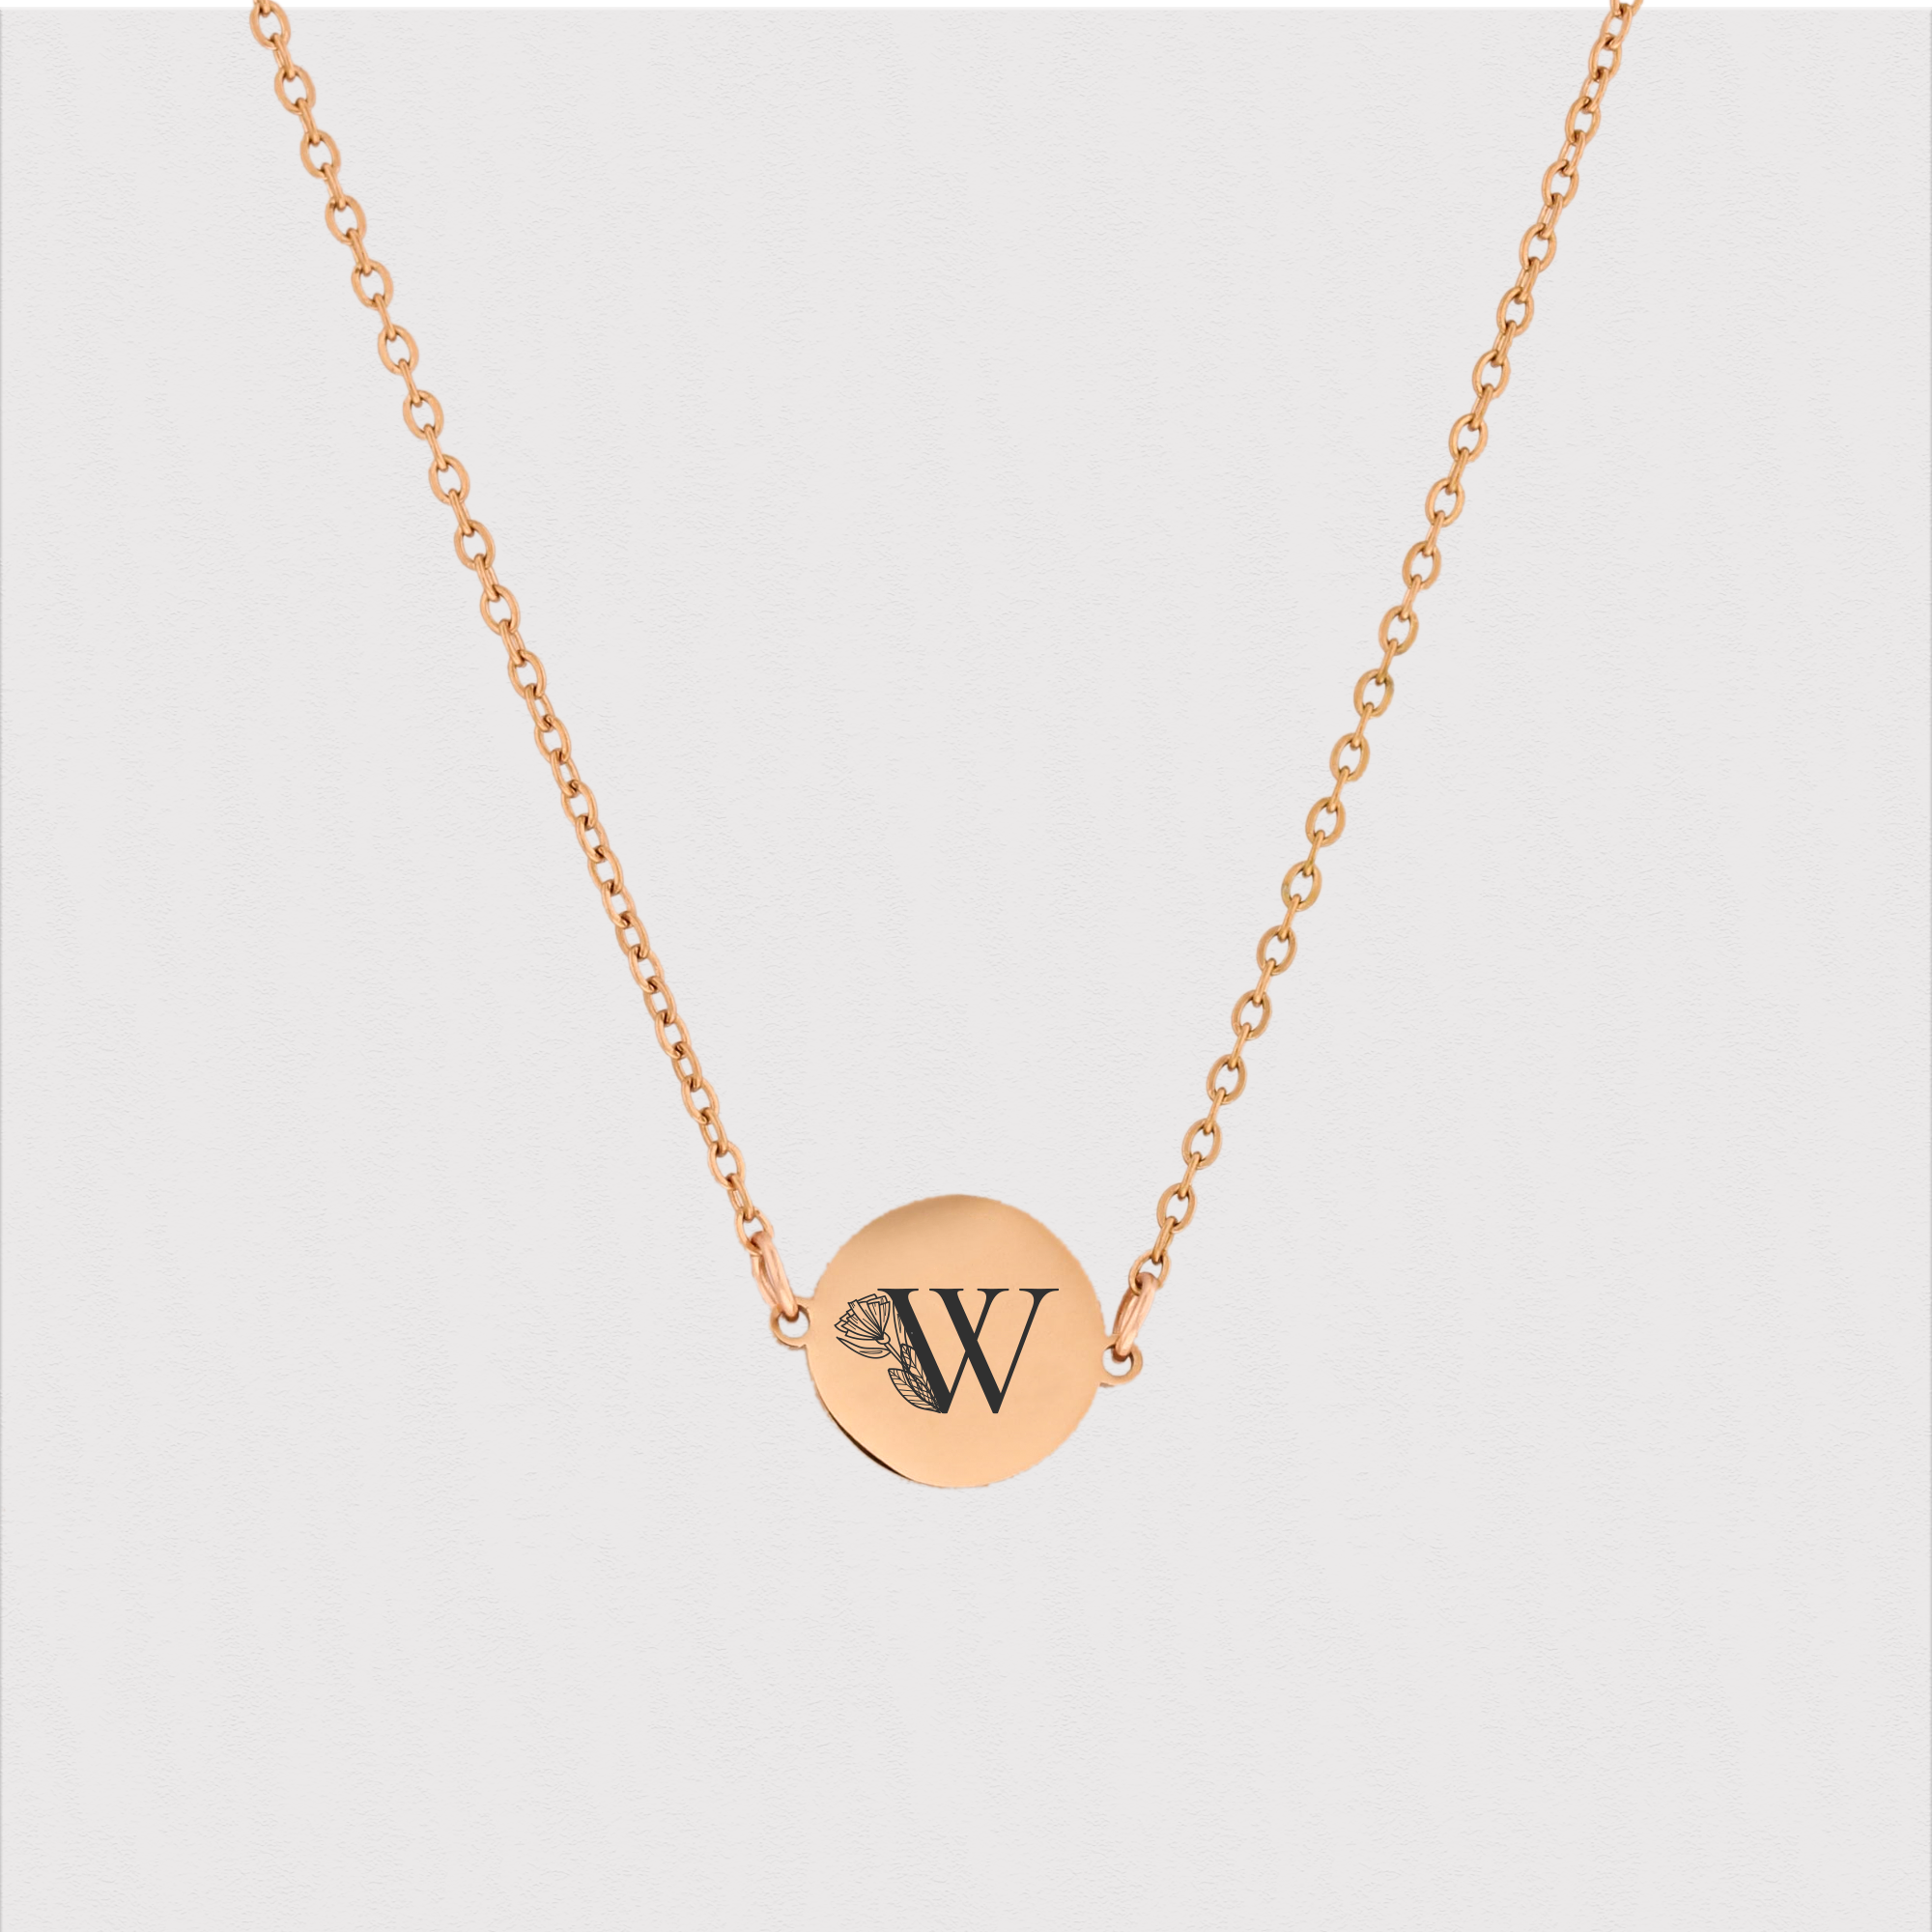 Engraved Flower Letter Necklace KCL 16 B